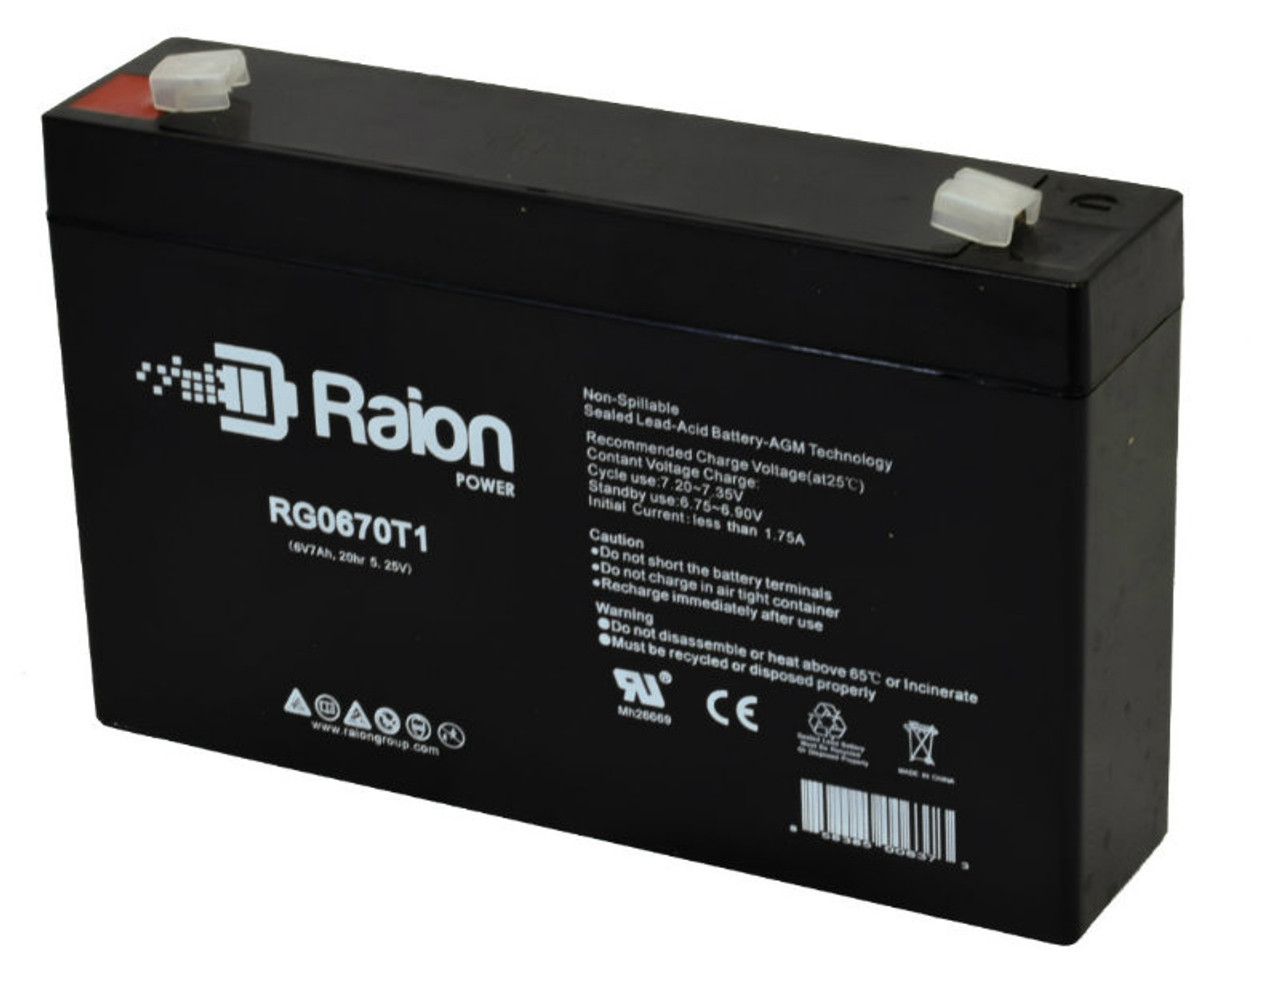 Raion Power RG0670T1 Replacement Battery for Alexander MS4AAPW OEM Battery